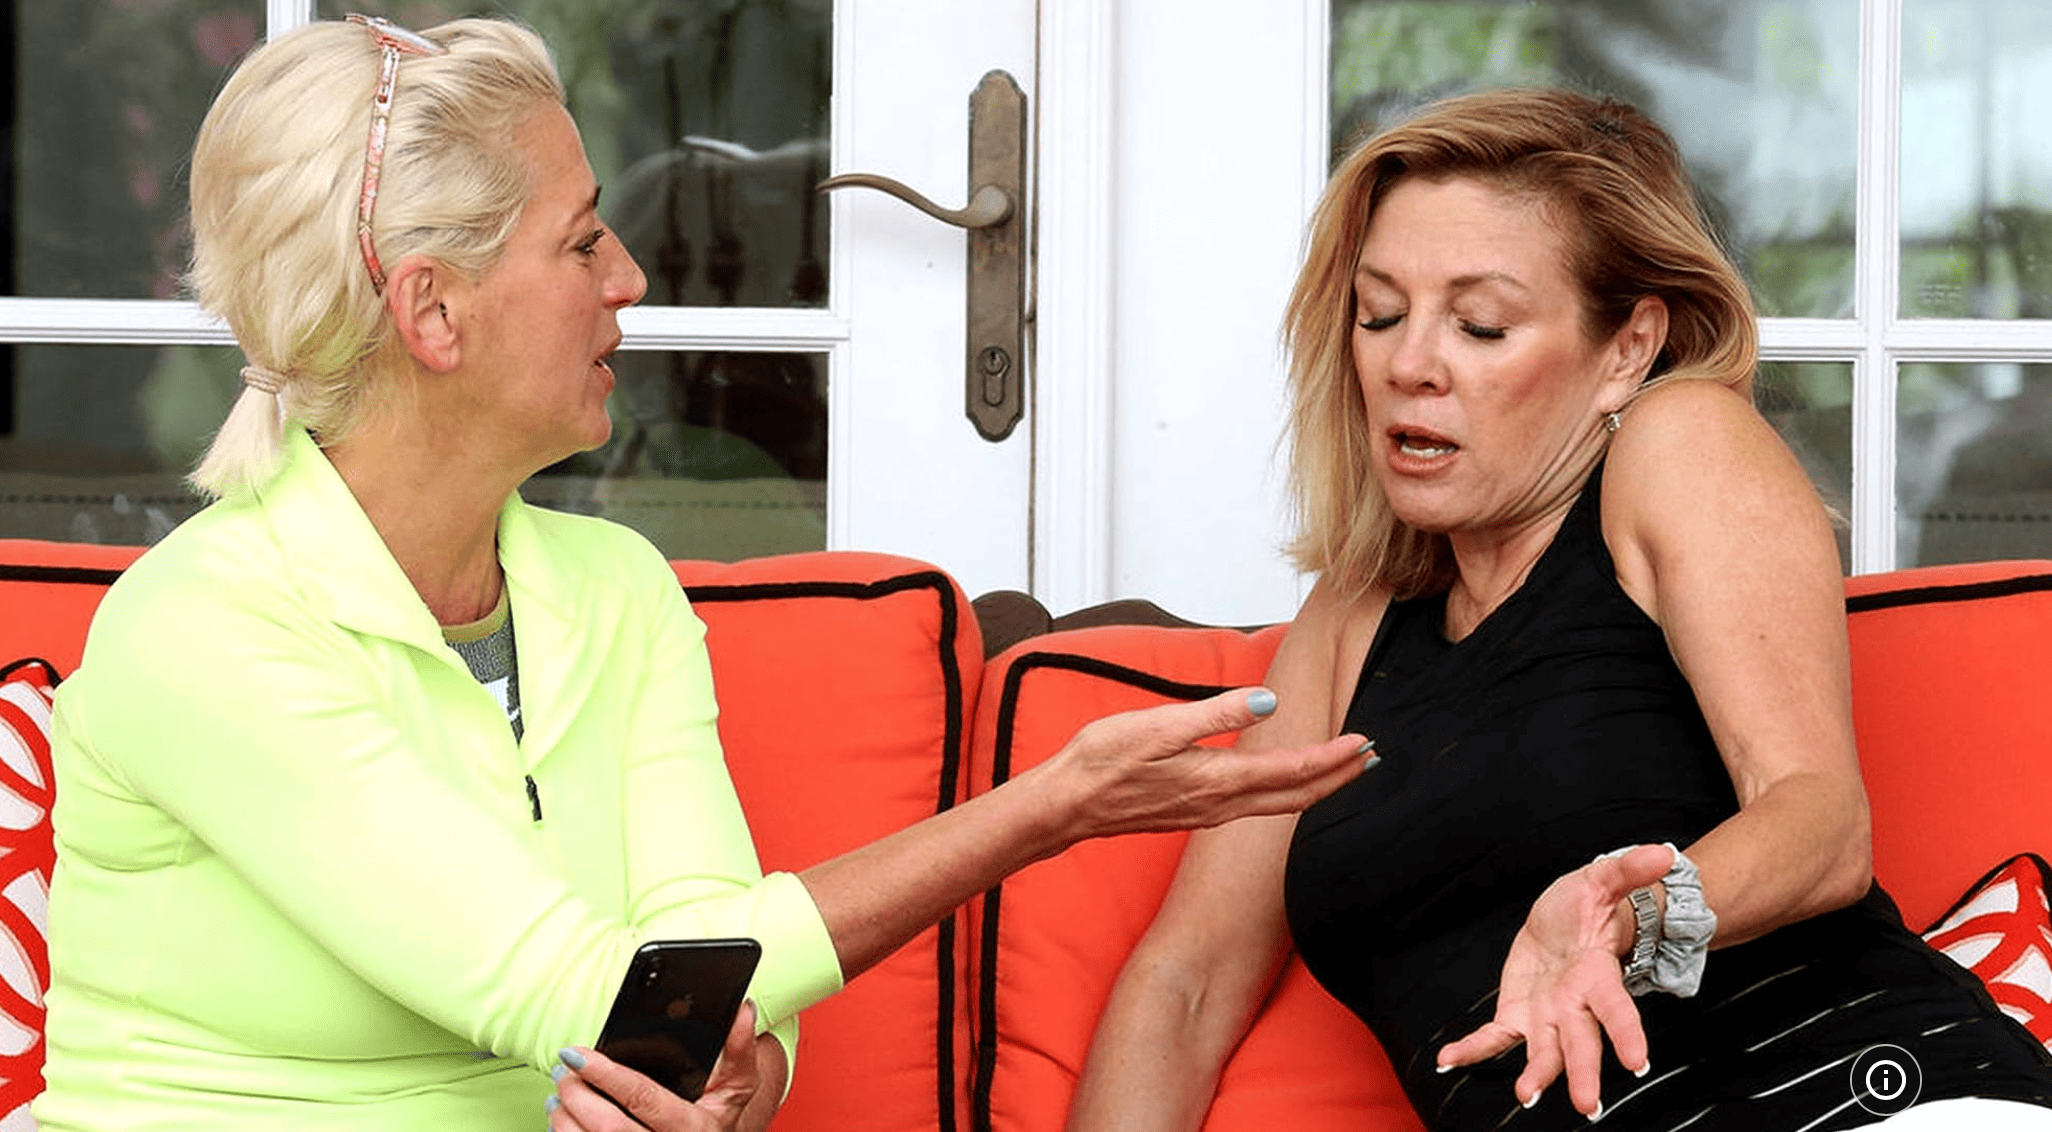 Dorinda Medley and Ramona Singer sitting on a bench wearing athletic clothes and having an impassioned conversation in this image from Ricochet Television